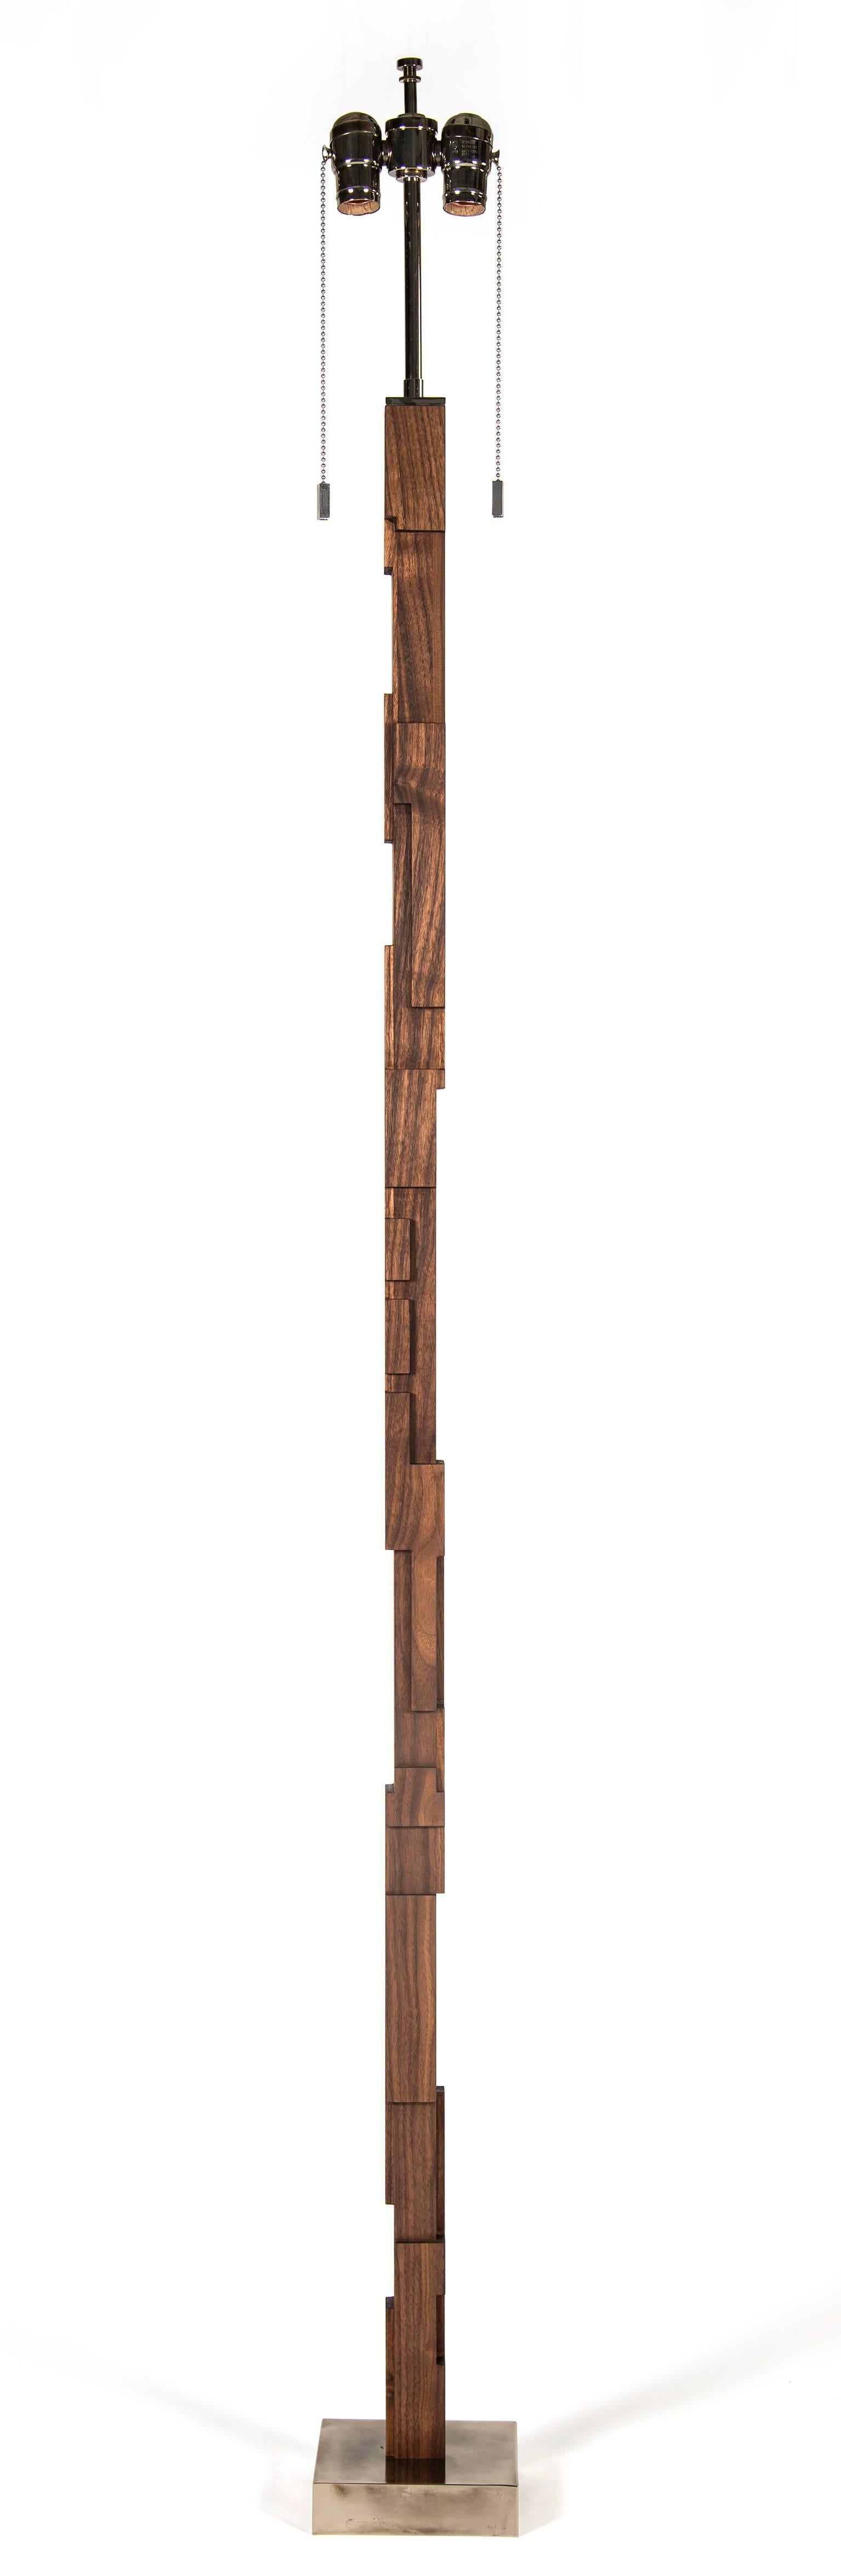 The Glyph floor lamp design is influenced by several styles and motifs such as the iconic Frank Lloyd Wright textile blocks of 'La Miniatura'-The Millard House as well as 'soft' Brutalist and Bauhaus aspects. The Glyph lamp is shown in solid walnut